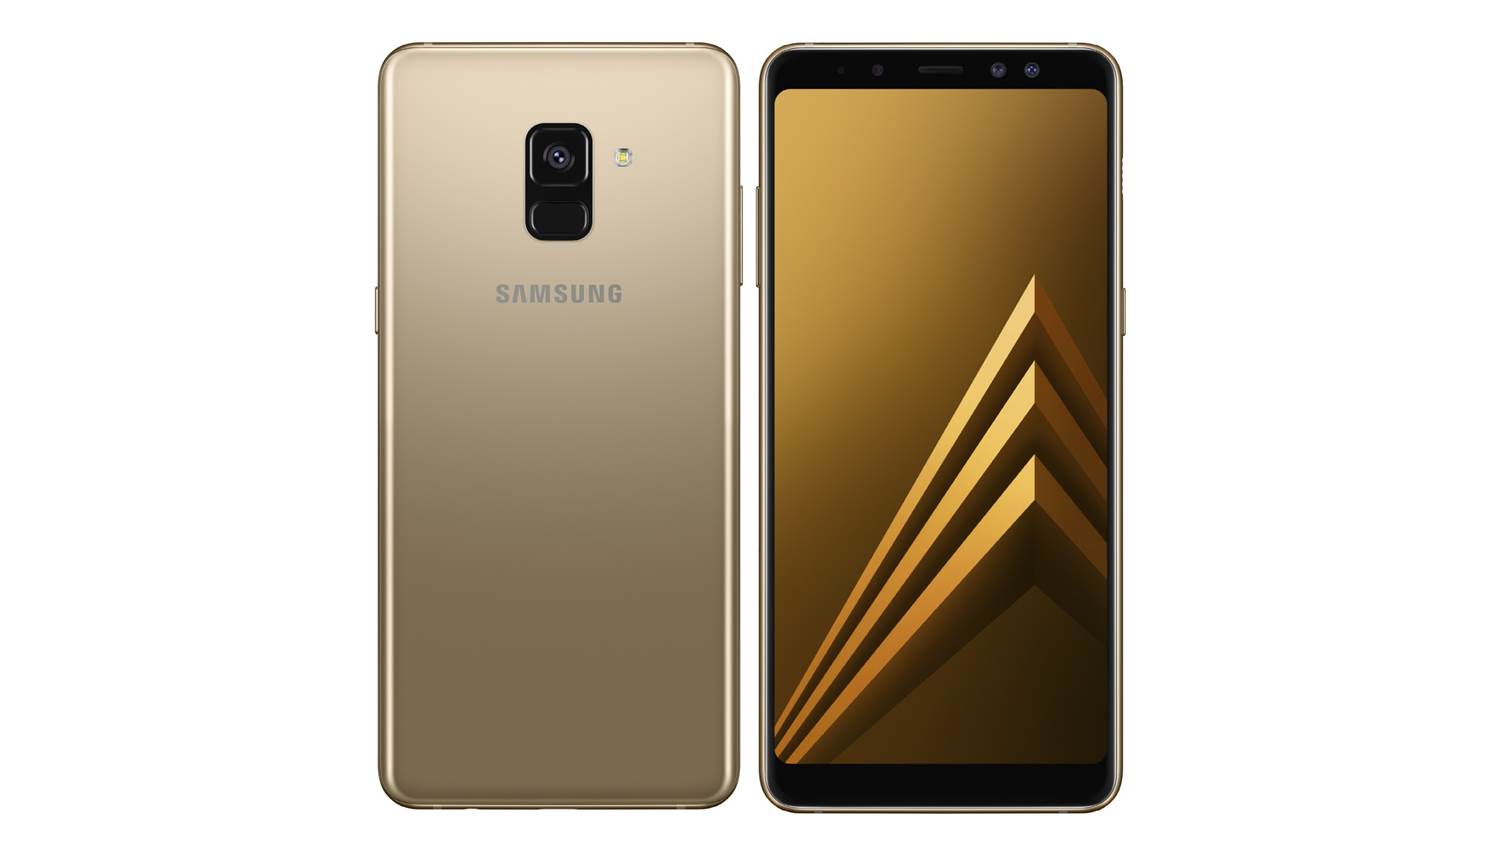 Samsung Galaxy A8+ 2018 - Full Specifications - MobileDevices.com.pk
